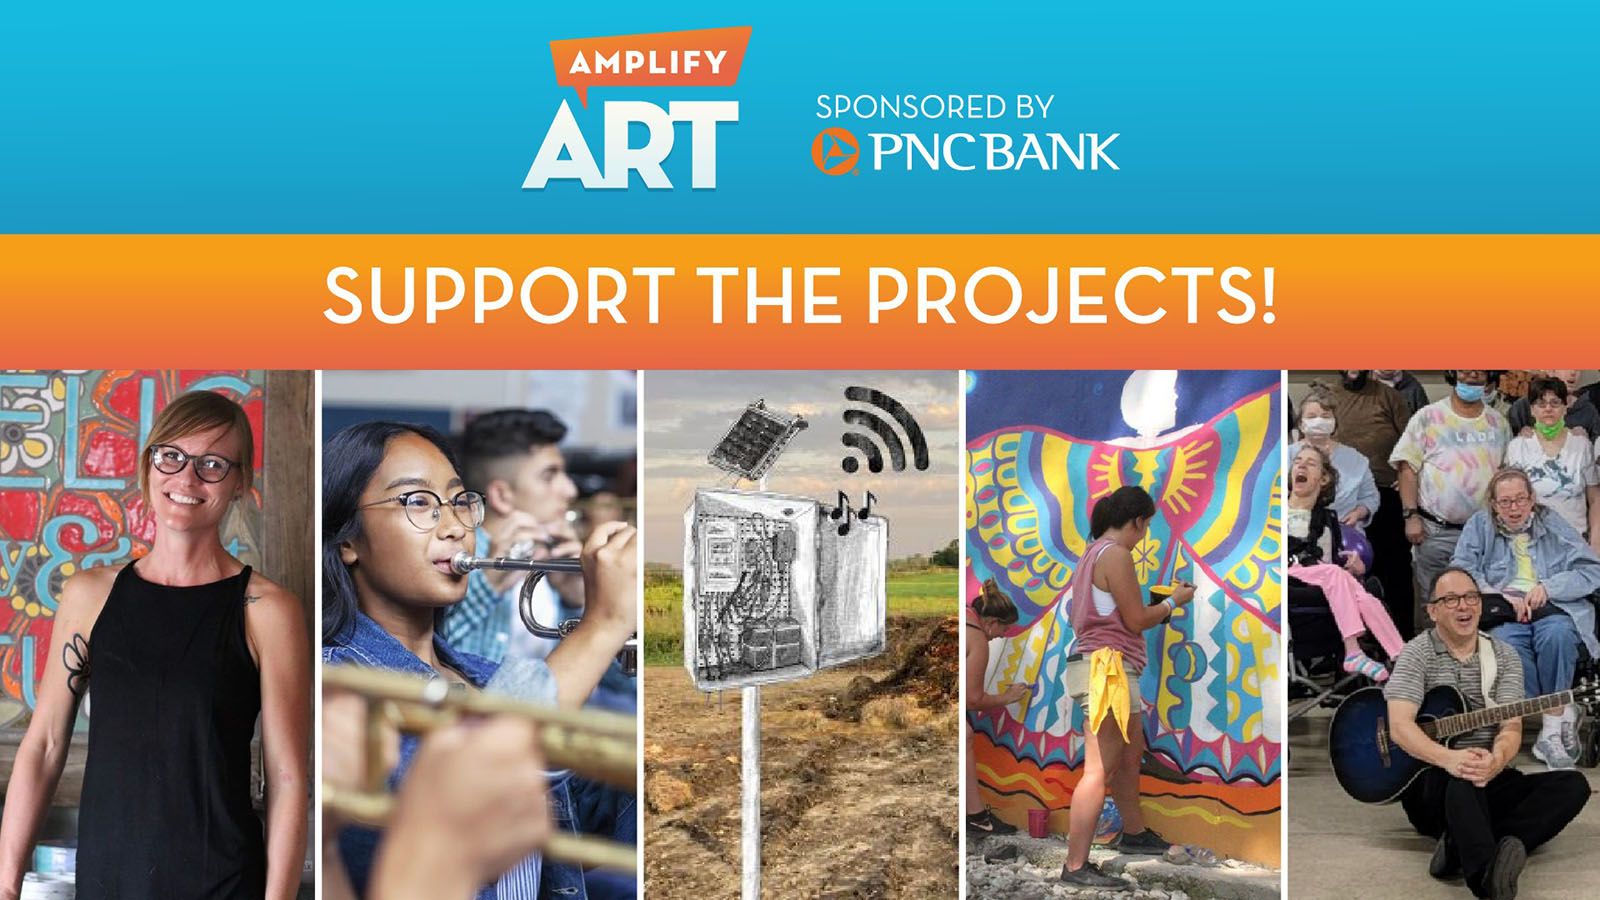 Applications are being accepted for Amplify Art grants from Arts United.